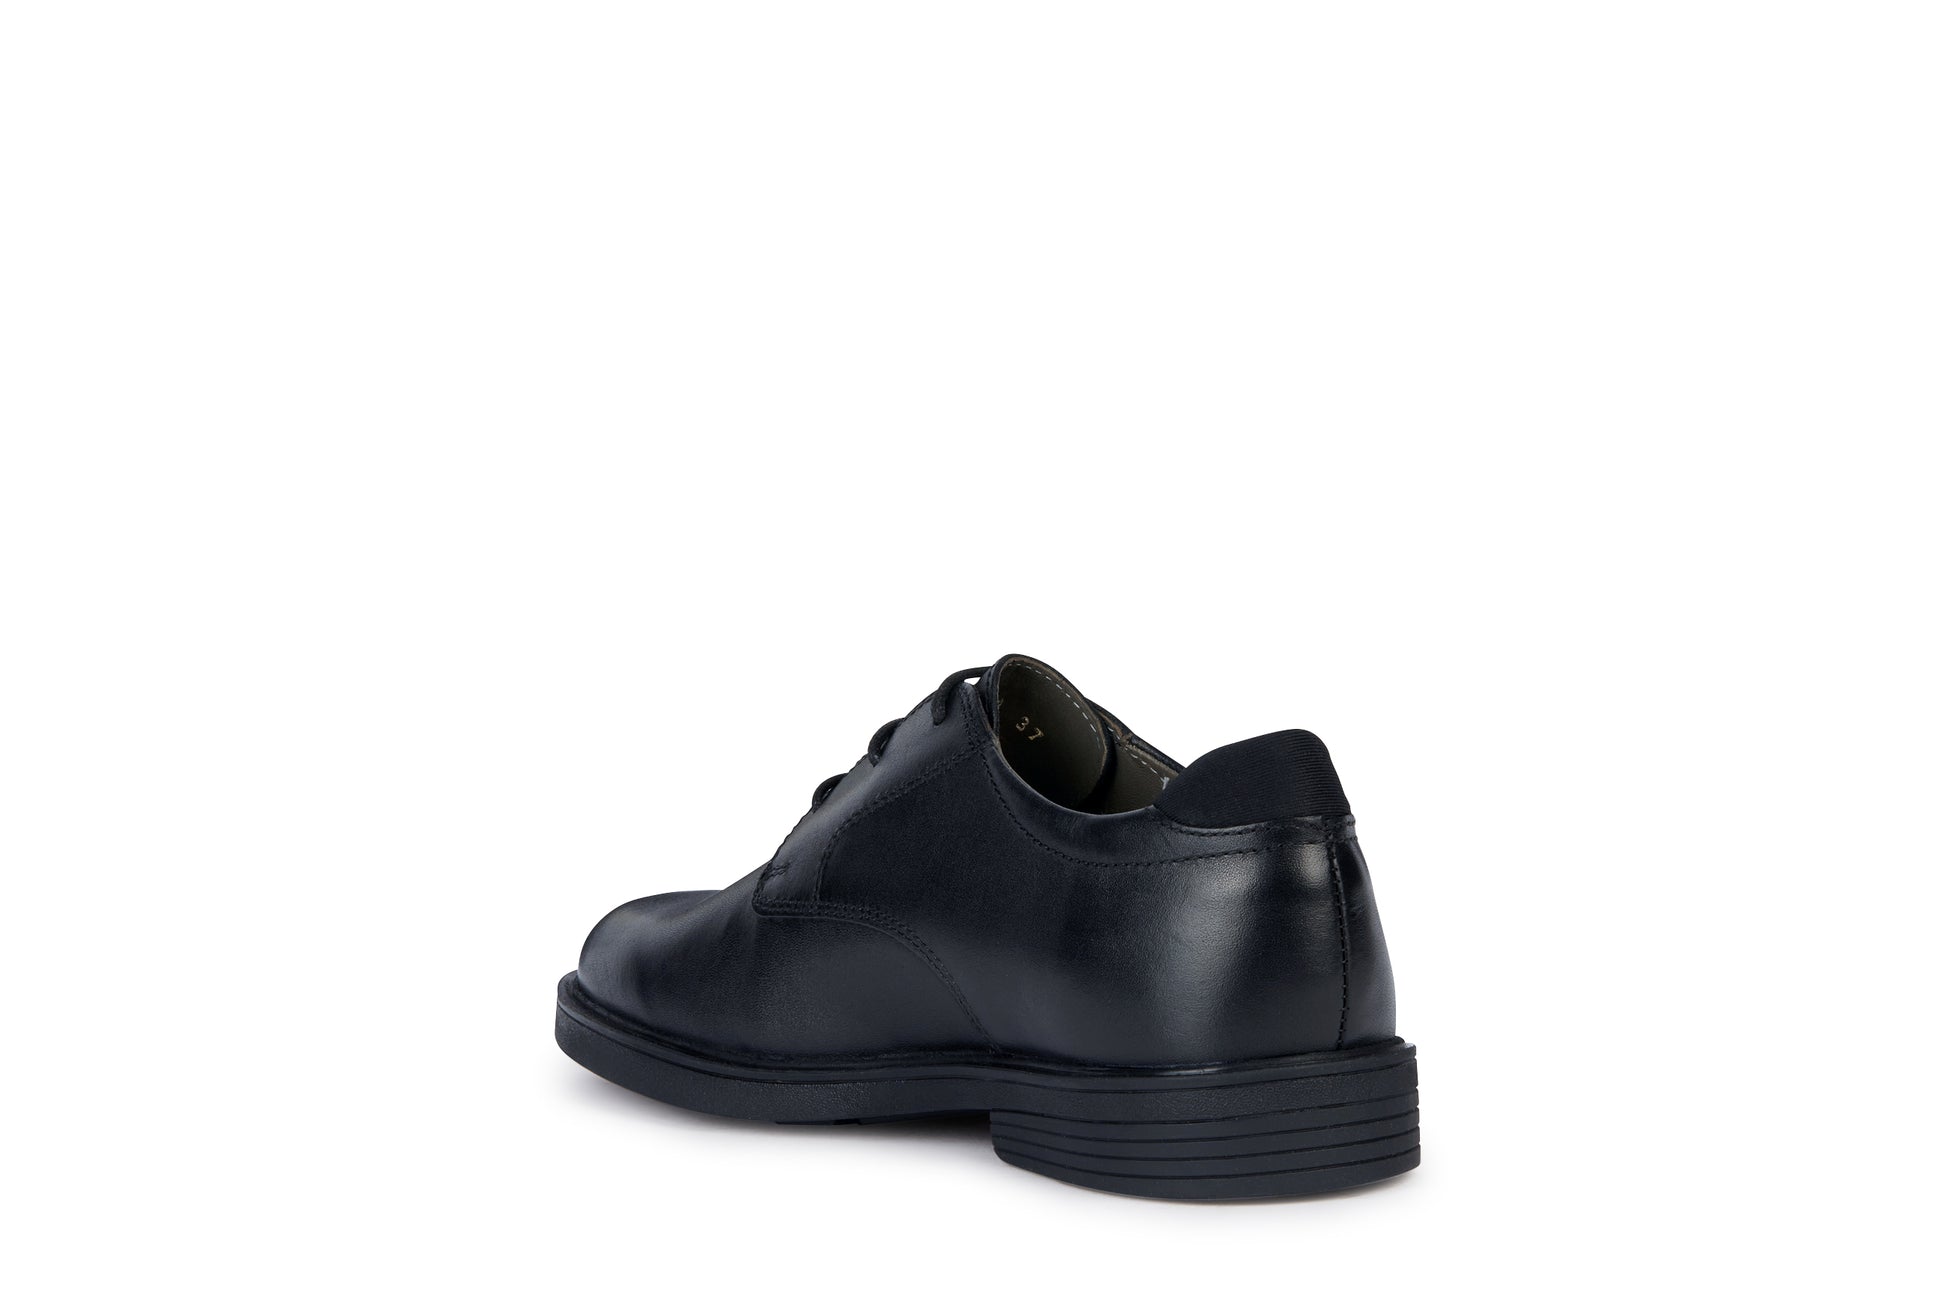 A senior boys school shoe by Geox, style Zheeno, lace-up in black leather. Rear angled view.